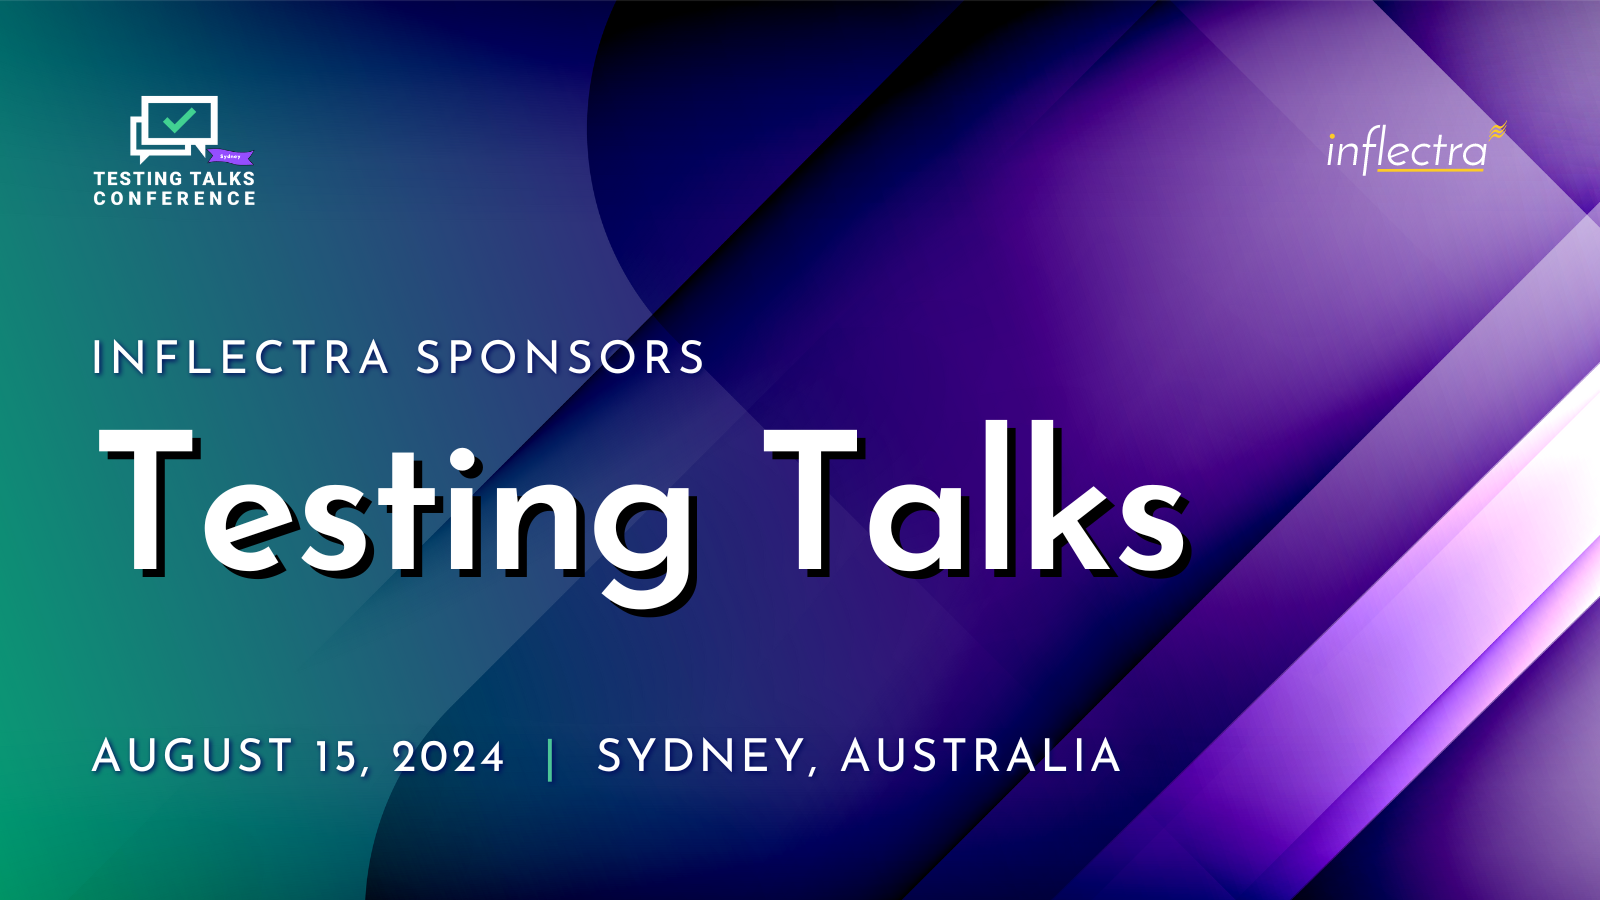 Purple and teal banner promoting the Testing Talks Conference sponsored by Inflectra on August 15, 2024, in Sydney, Australia.